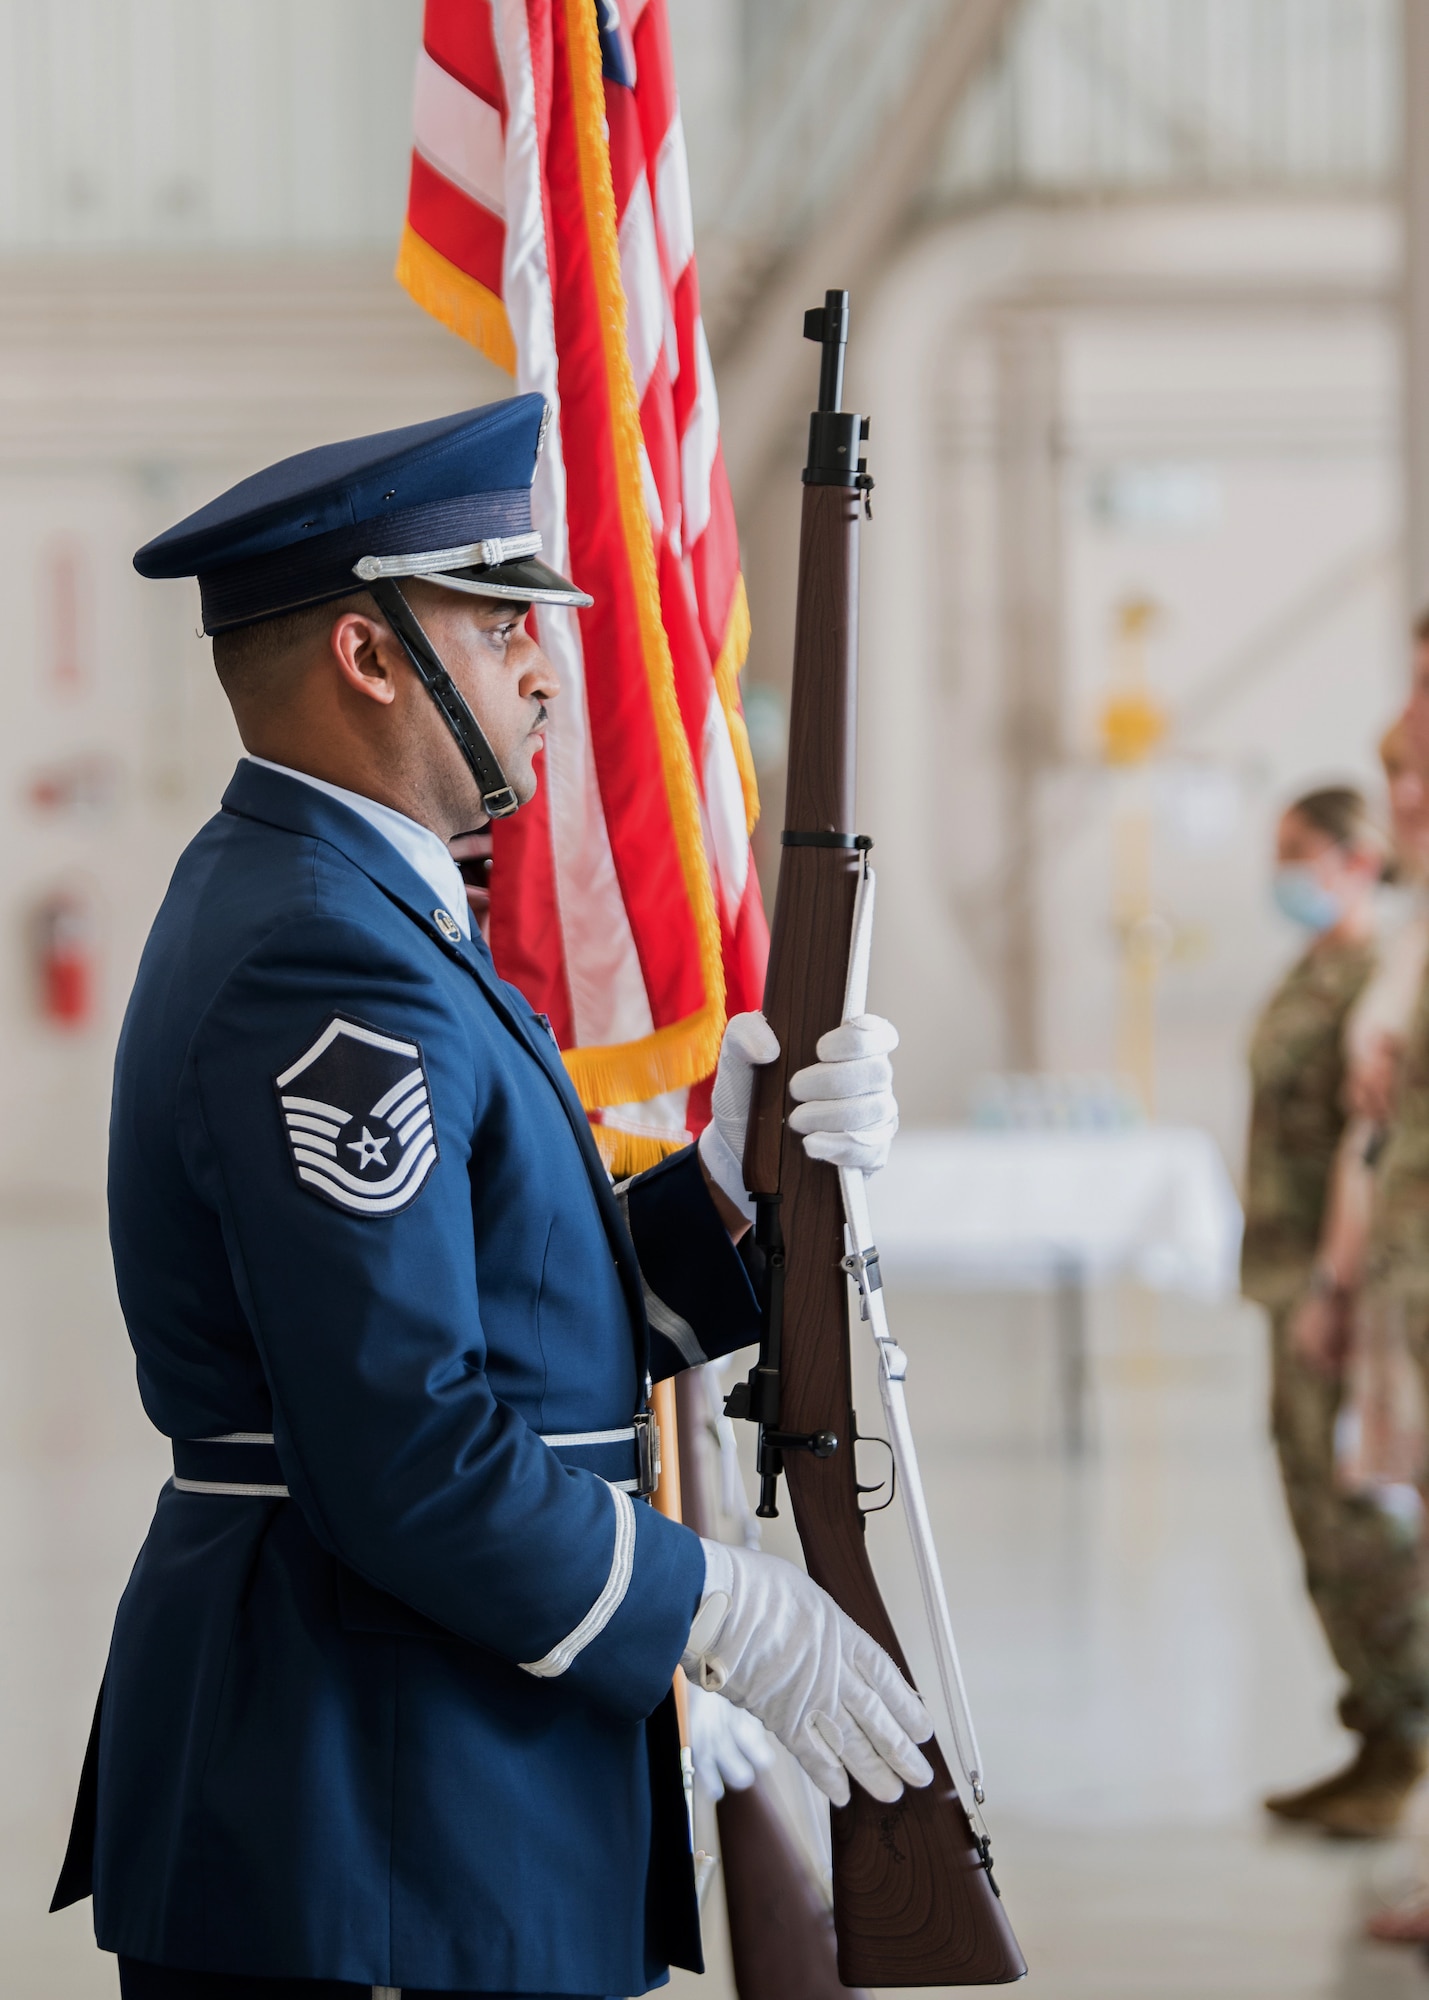 Master Sgt. Jason Newby, a member of the 123rd Airlift Wing’s Base Honor Guard, stands at attention for the playing of the National Anthem during a ceremony at the Kentucky Air National Guard Base in Louisville, Ky., May 15, 2021. Chief Master Sgt. James Tongate assumed responsibility as the newest state command chief during the ceremony. (U.S. Air National Guard photo by Senior Airman Chloe Ochs)